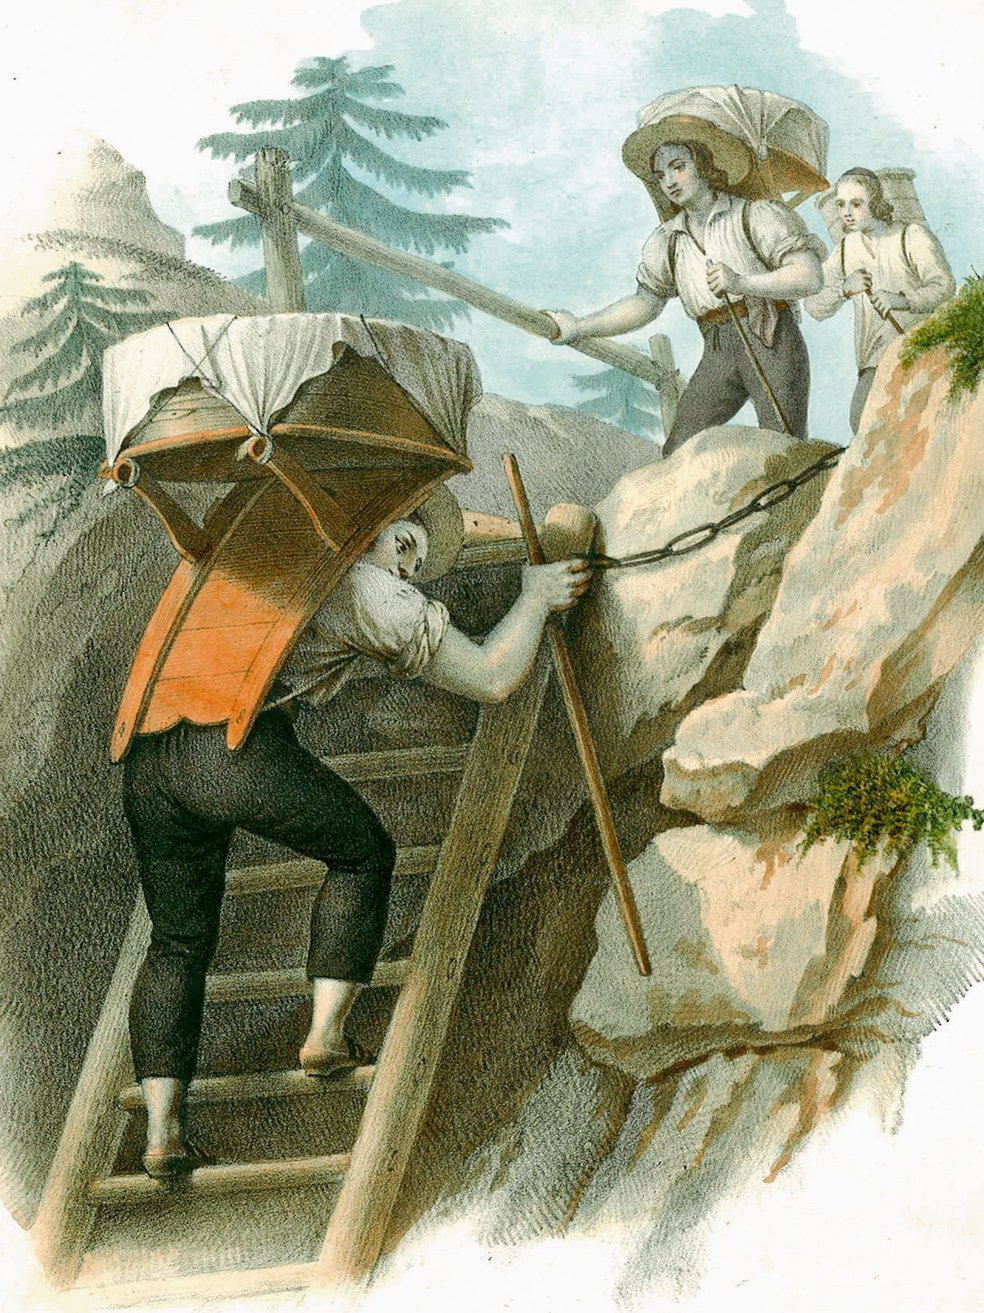 Cowherds taking cheese down to the valley – “Vachers descendant le fromage des montagne Canton Schwyz”, by Jean-Baptiste Zwinger (*1787) after Michael Föhn (1789–1853), lithograph by Gottfried Engelmann (1788–1839) from “Jeux et Usages” c1830.